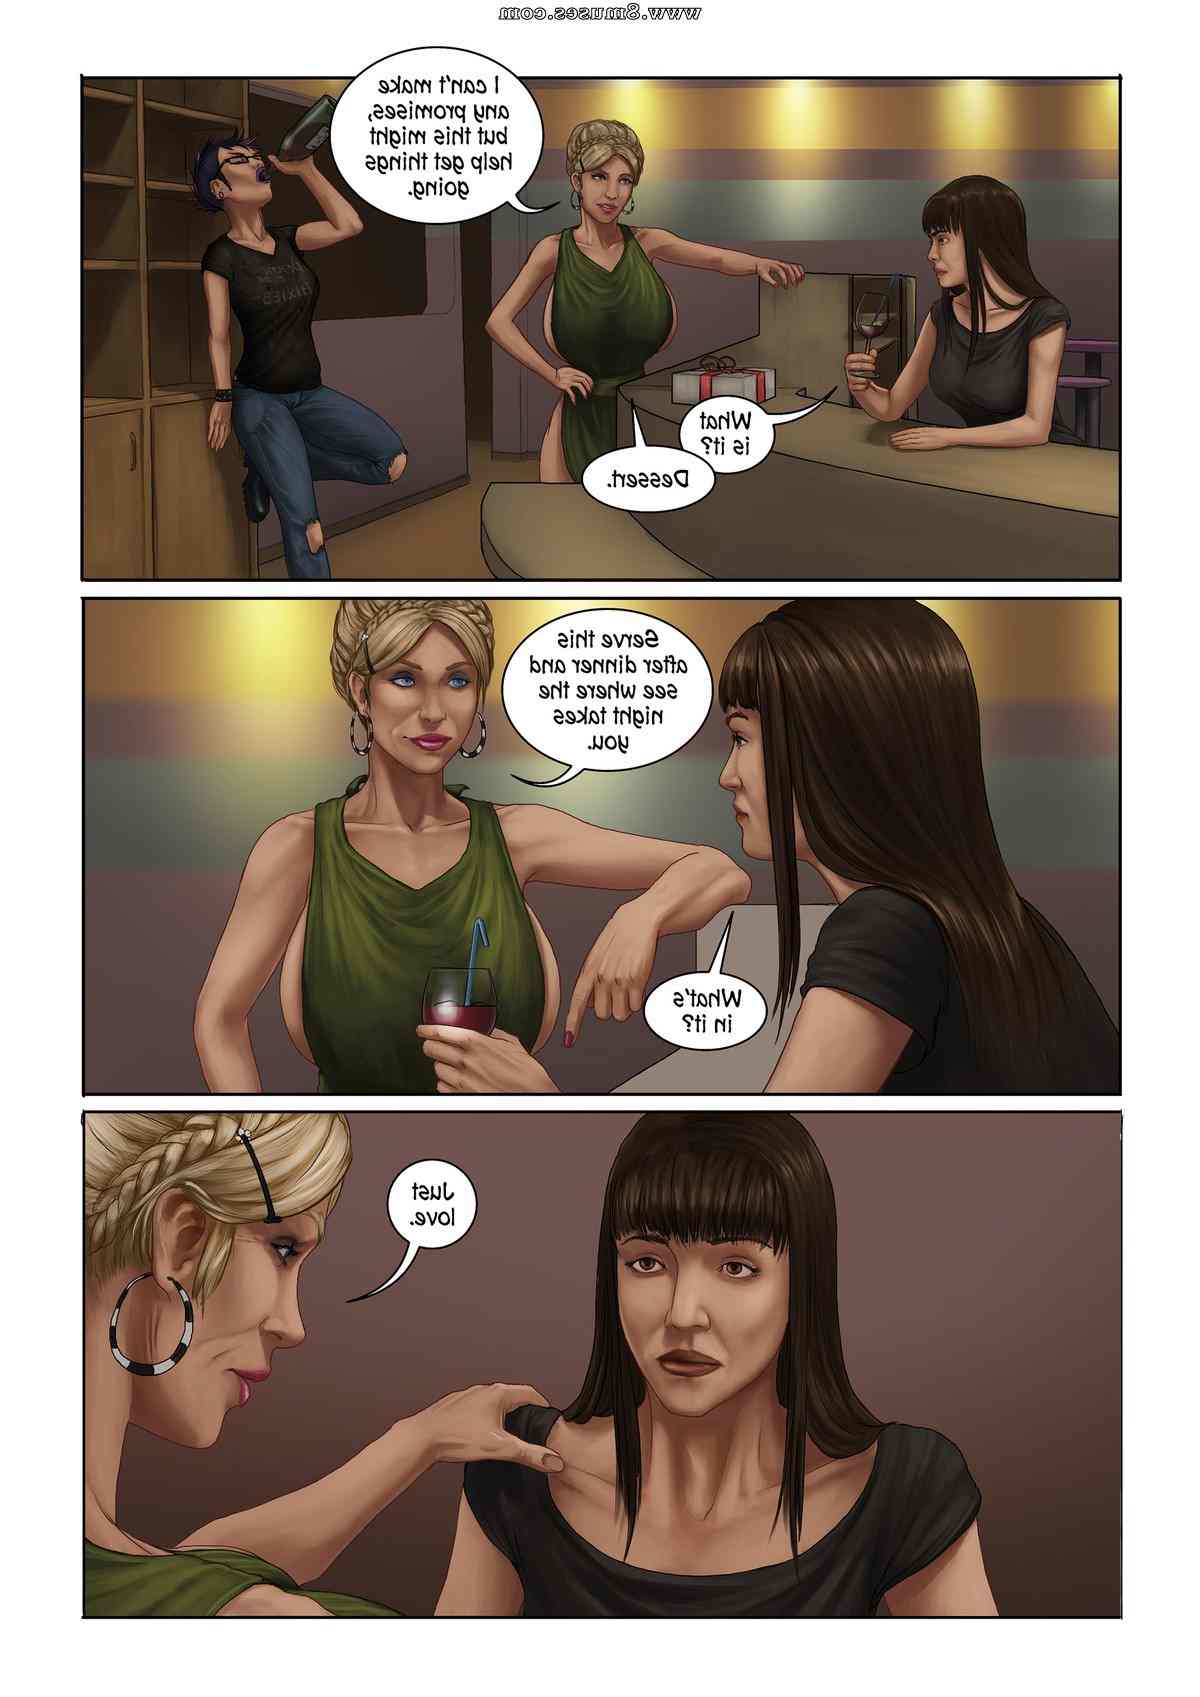 Expansionfan-Comics/Sugar-and-Spice Sugar_and_Spice__8muses_-_Sex_and_Porn_Comics_5.jpg